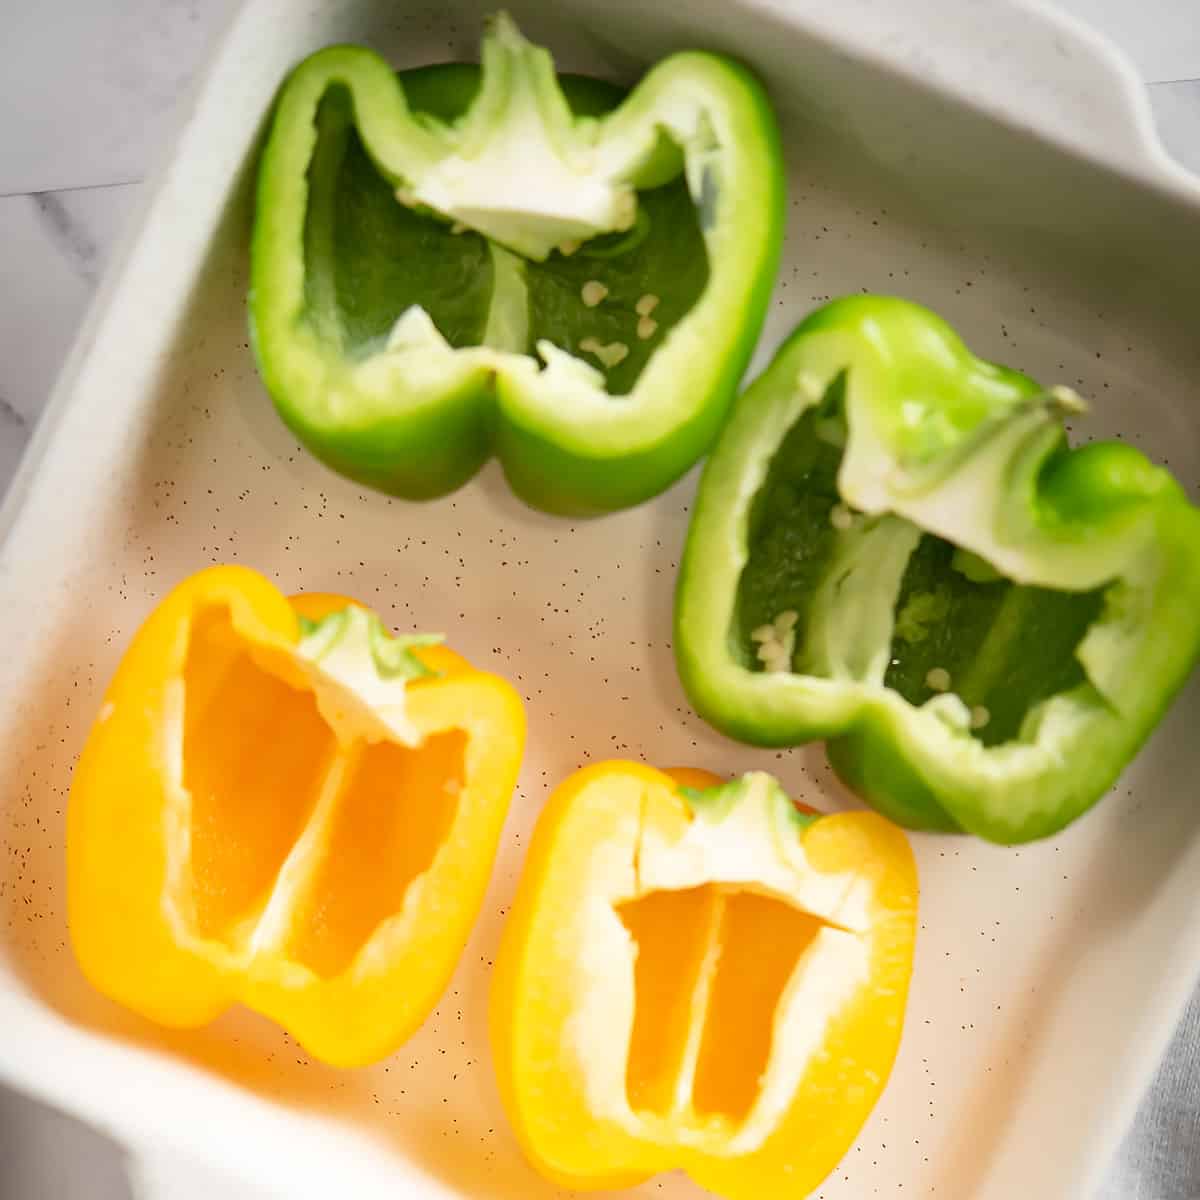 bell peppers are sliced into half in a casserole